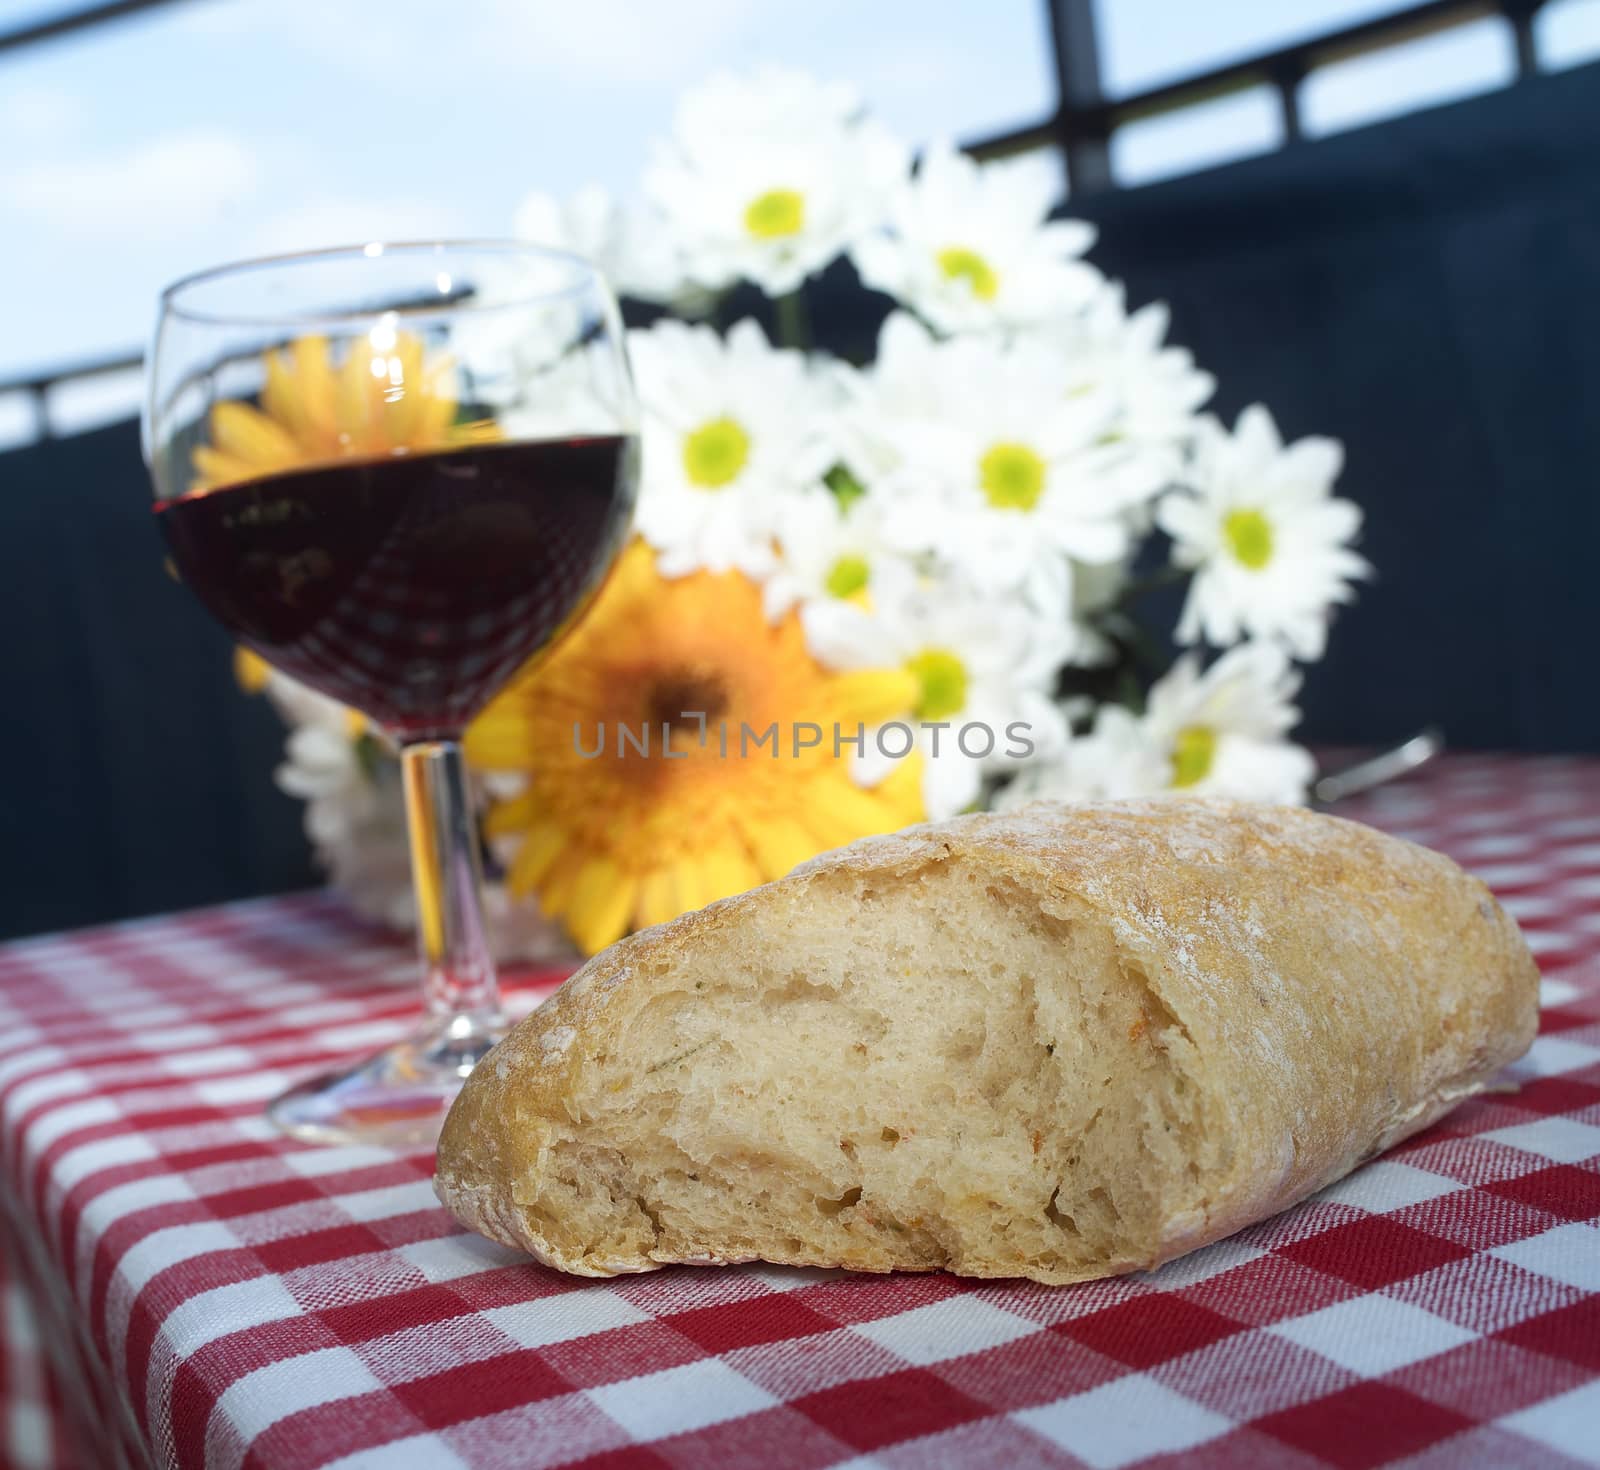 Wine and Bread by gemenacom